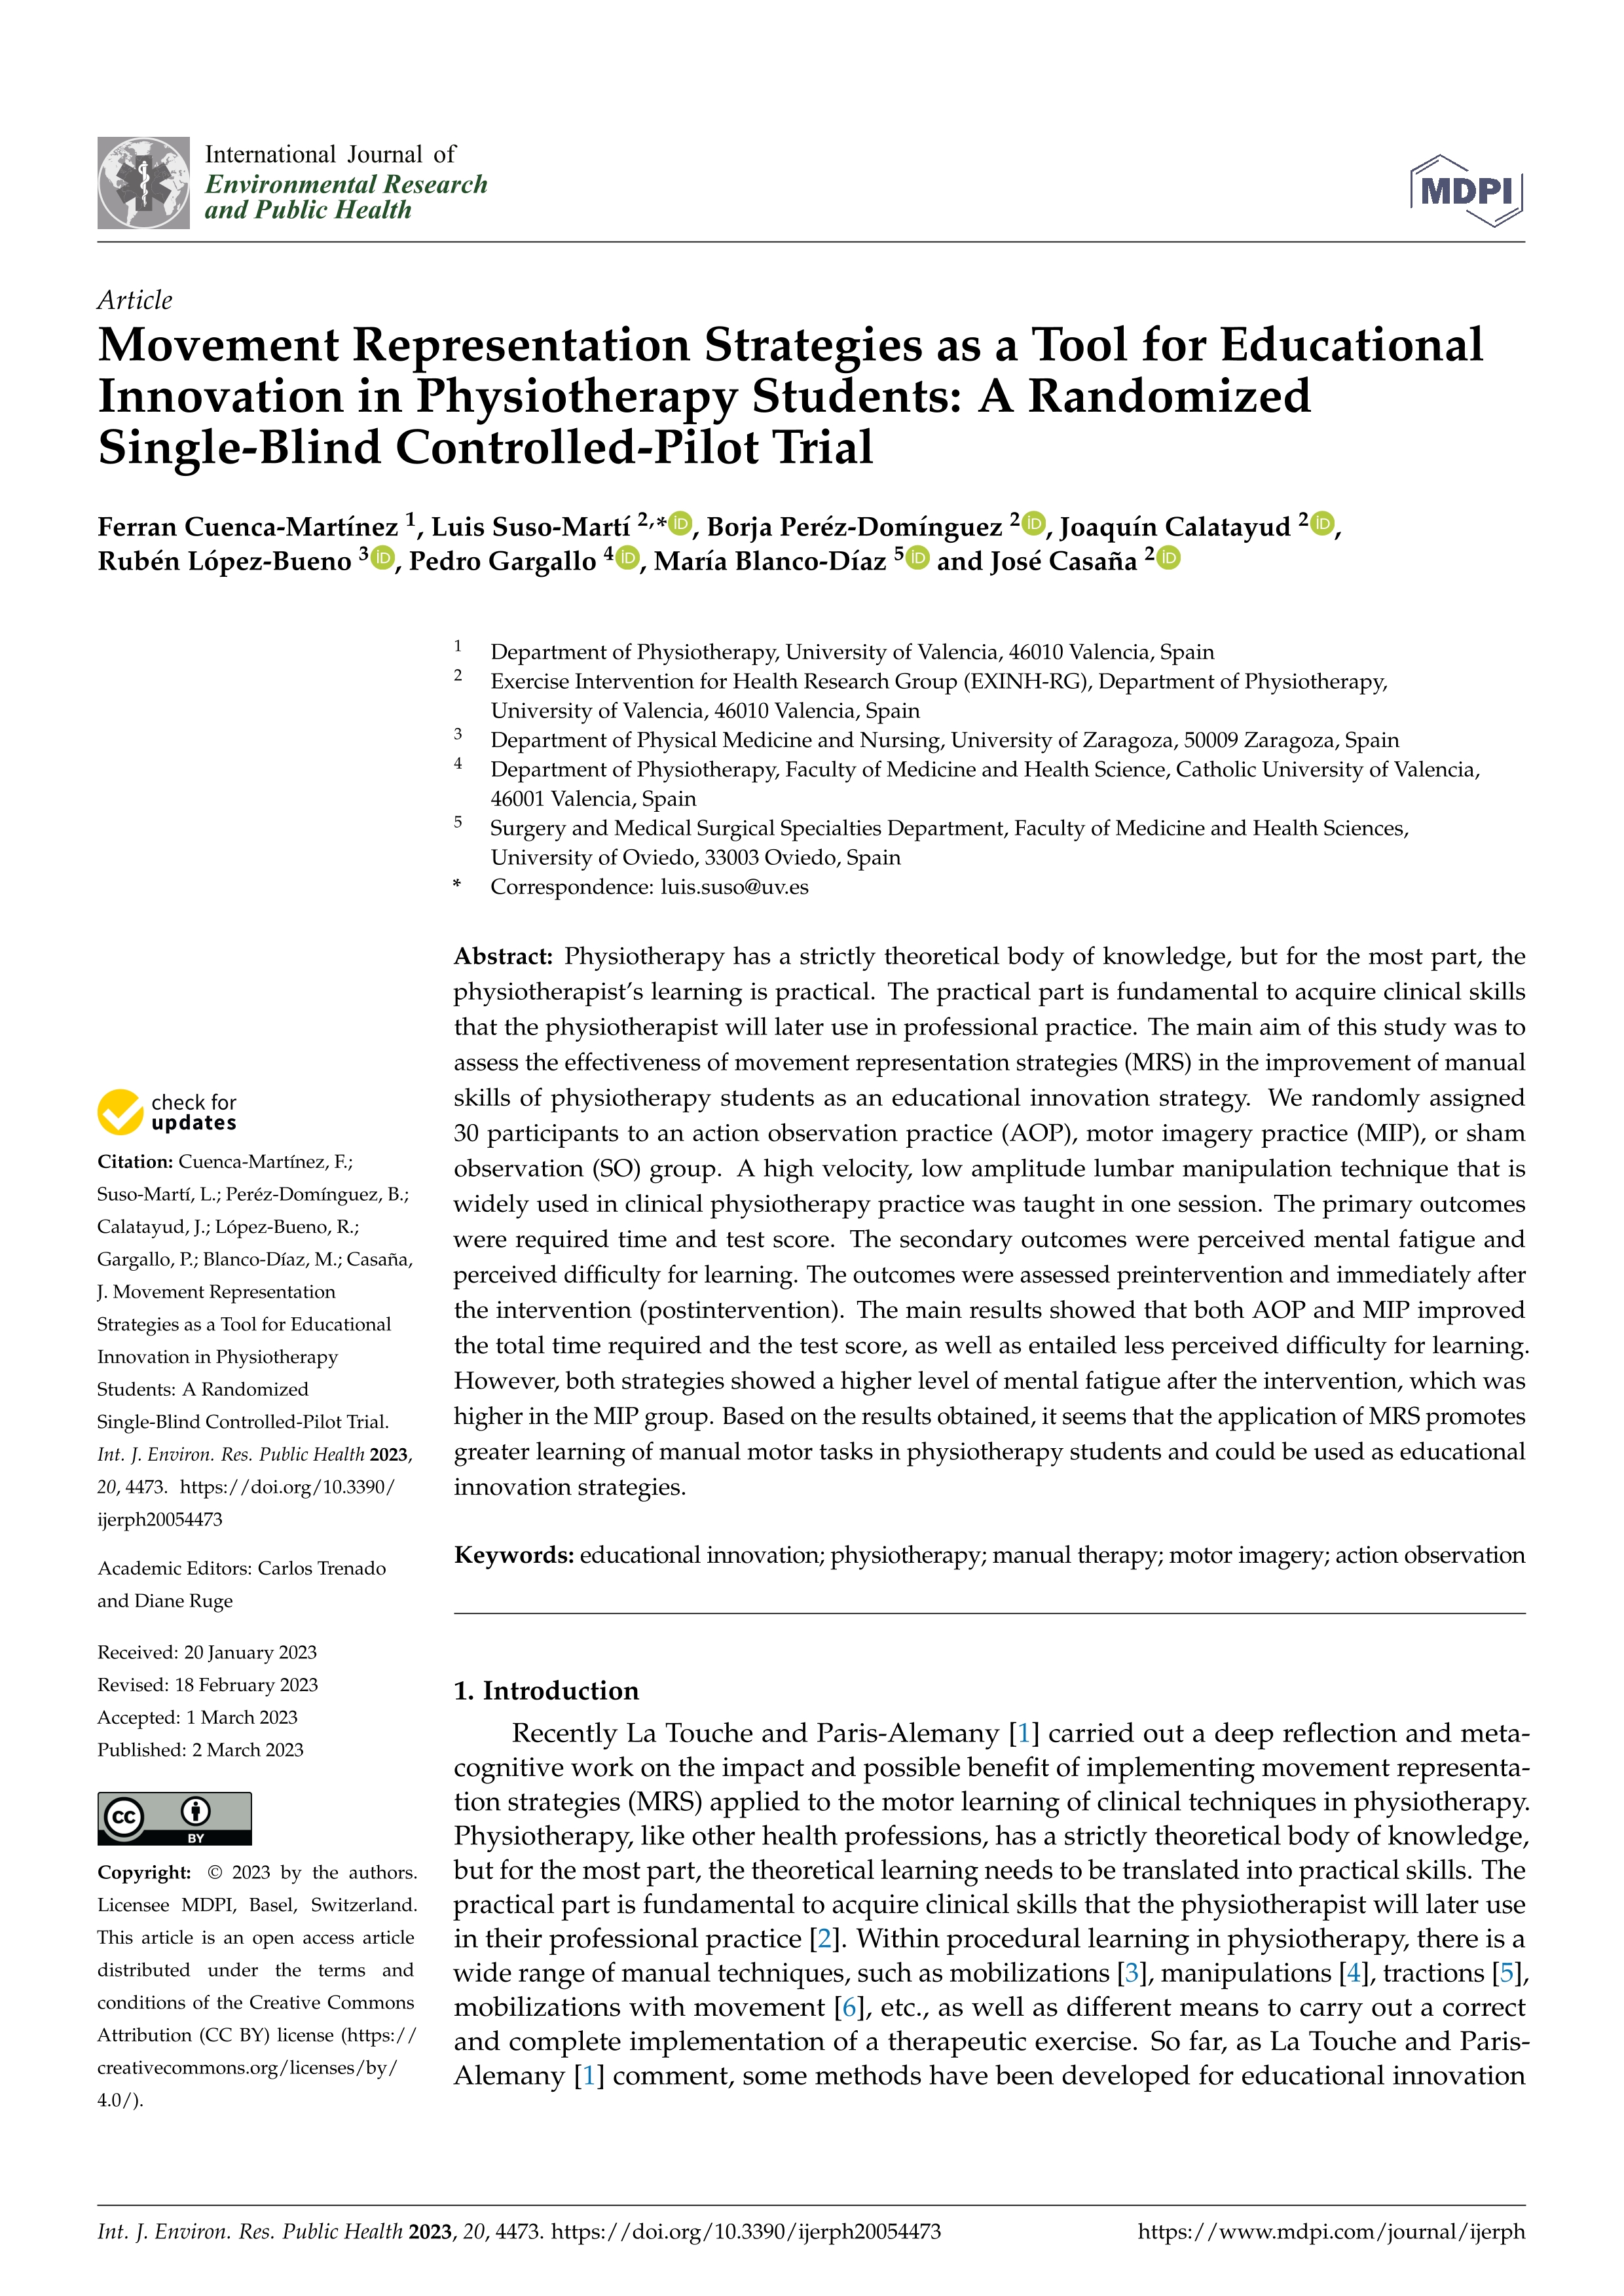 Movement representation strategies as a tool for educational innovation in physiotherapy students: a randomized single-blind controlled-pilot trial